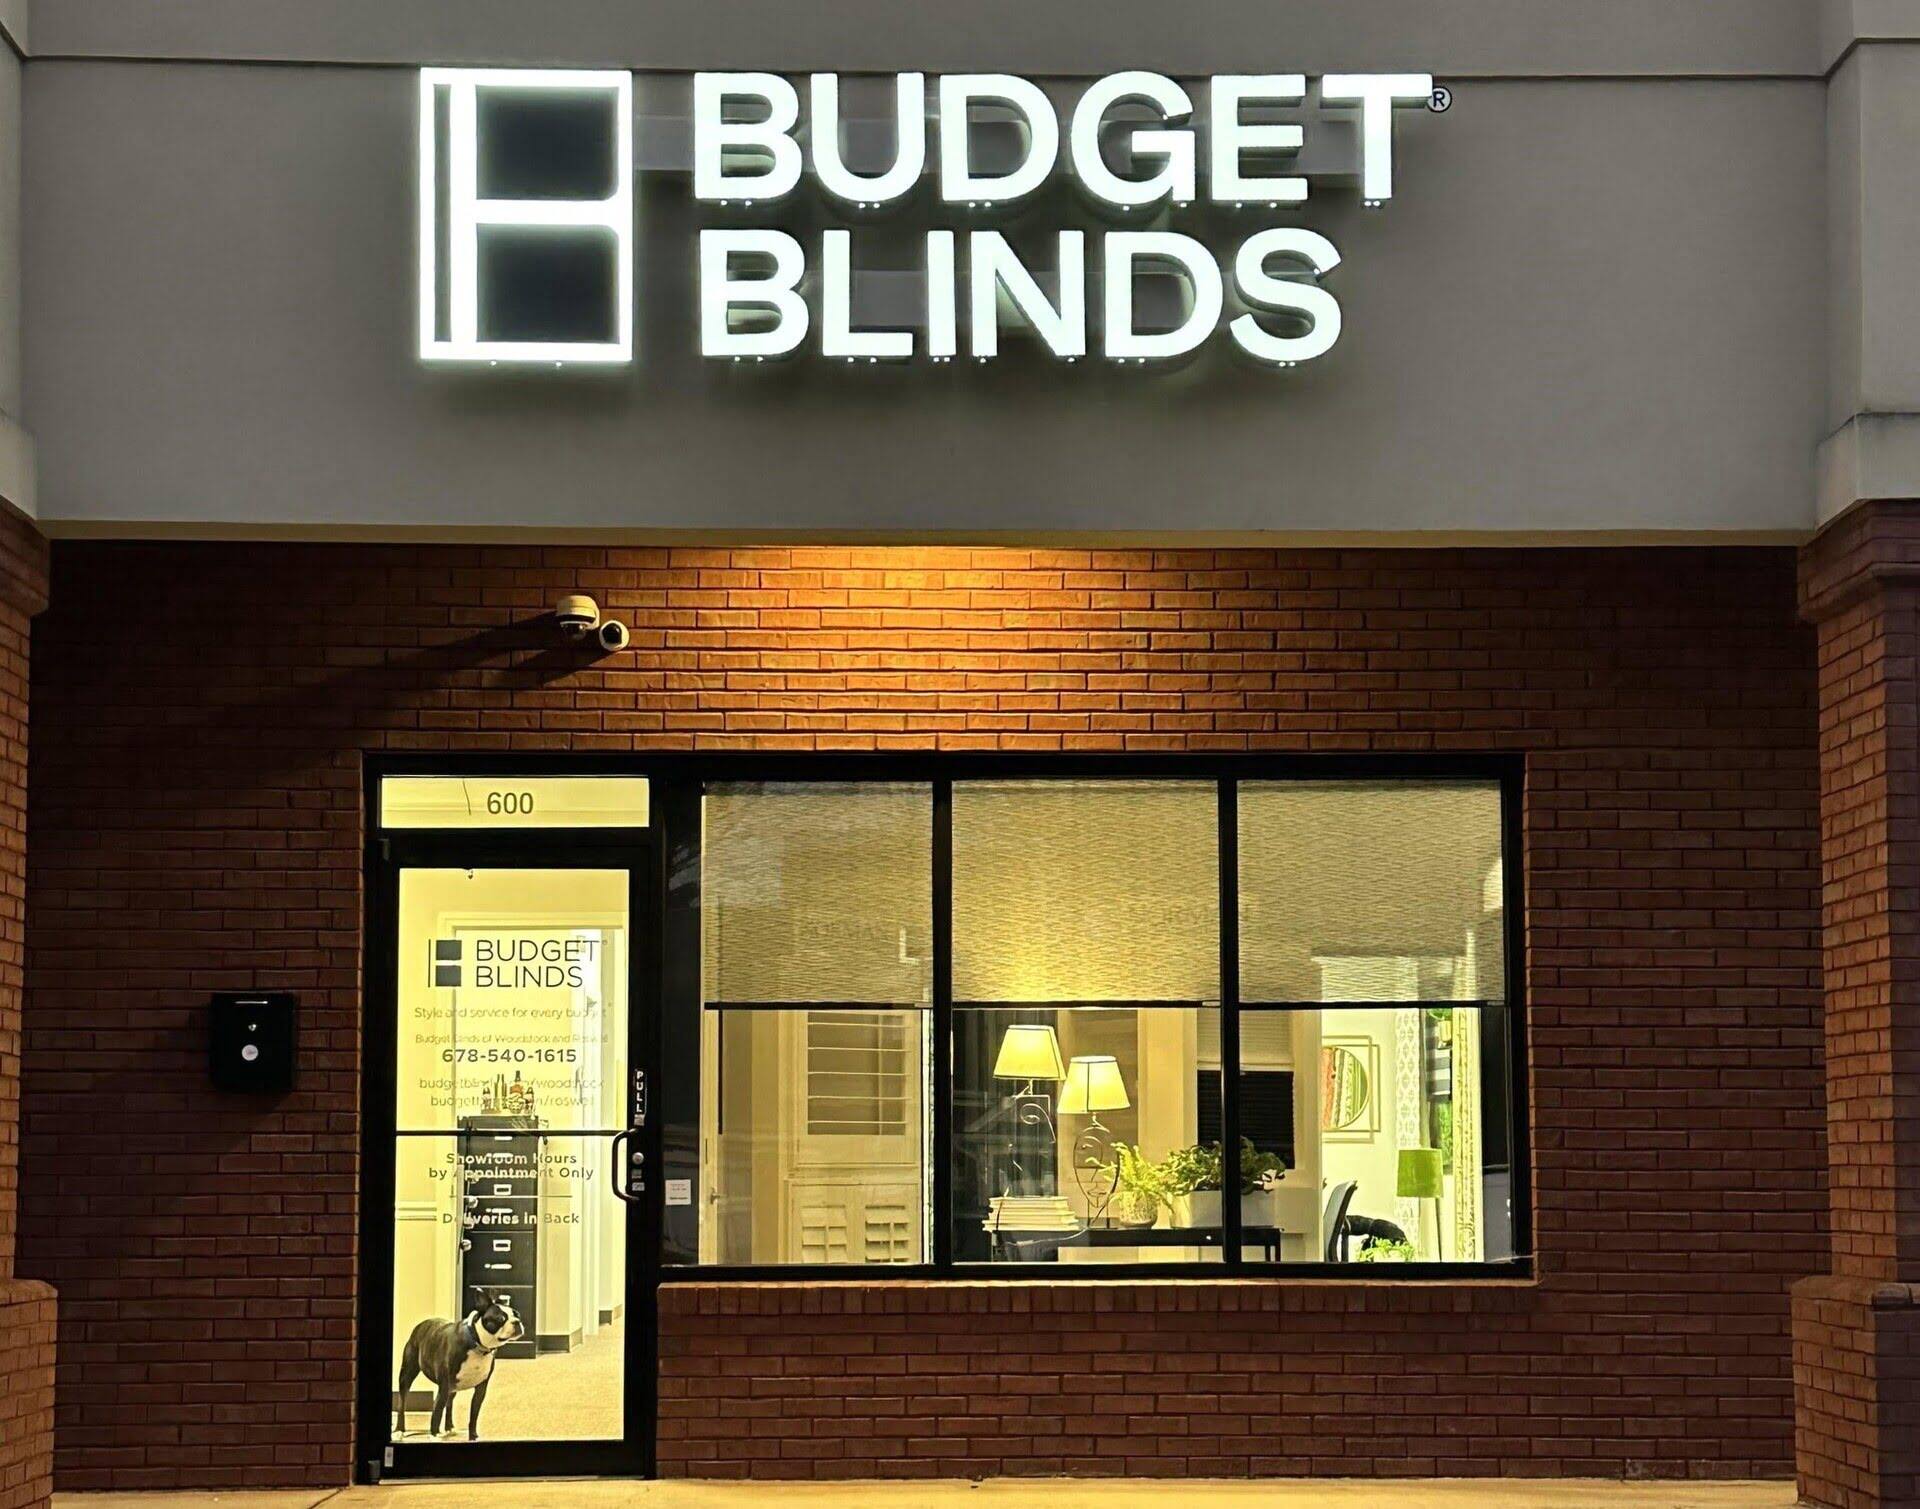 How Much Does A Budget Blinds Franchise Make